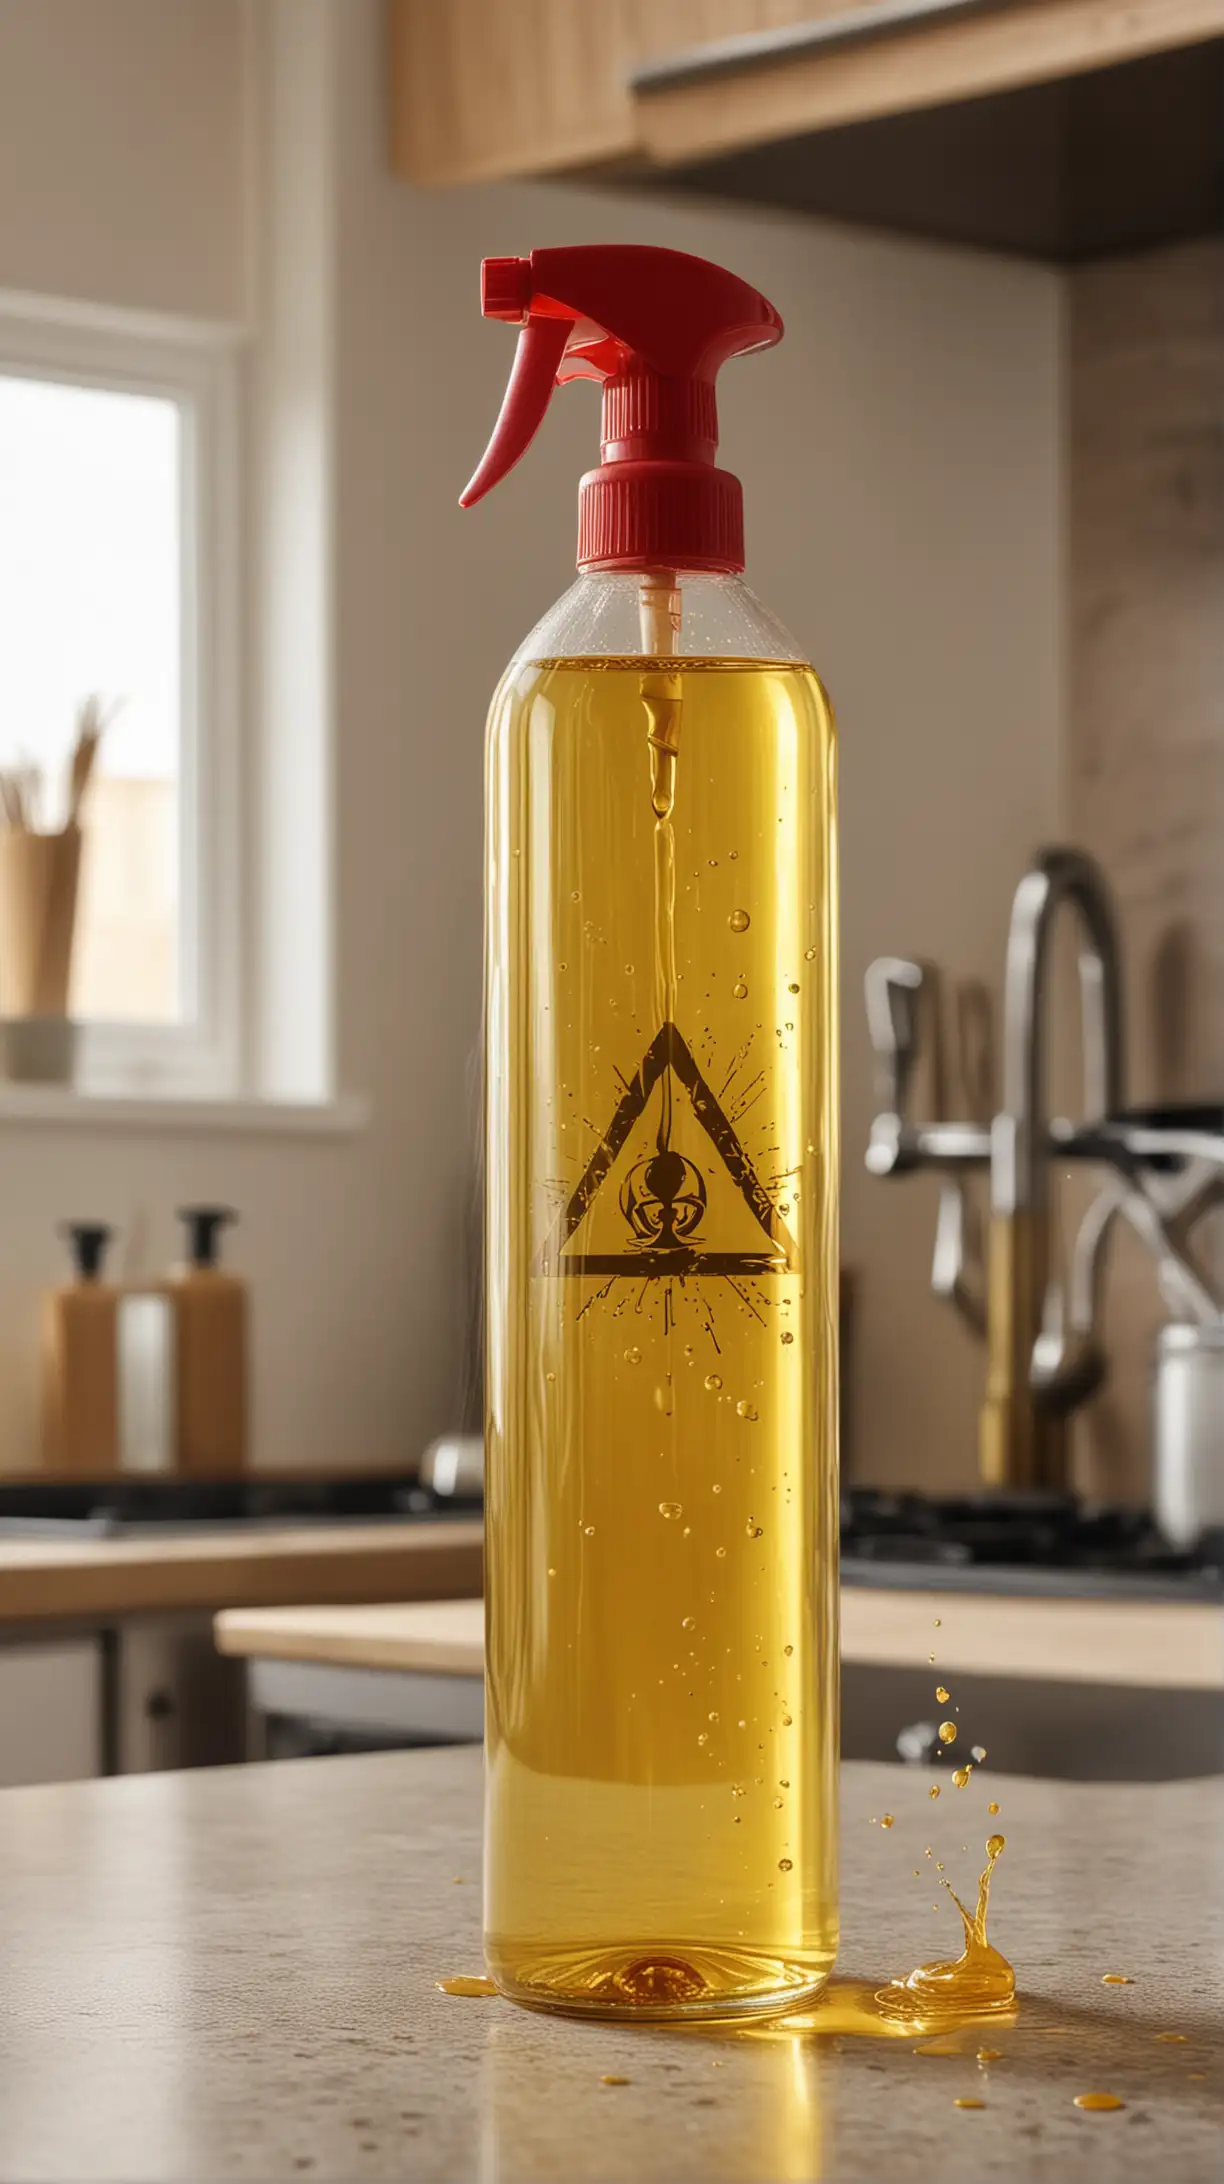 make a high quality image of a cooking oil spray bottle being used in the kitchen. the bottle has a hazard symbol engraved on it and the image makes it look like the bottle is going to explode

